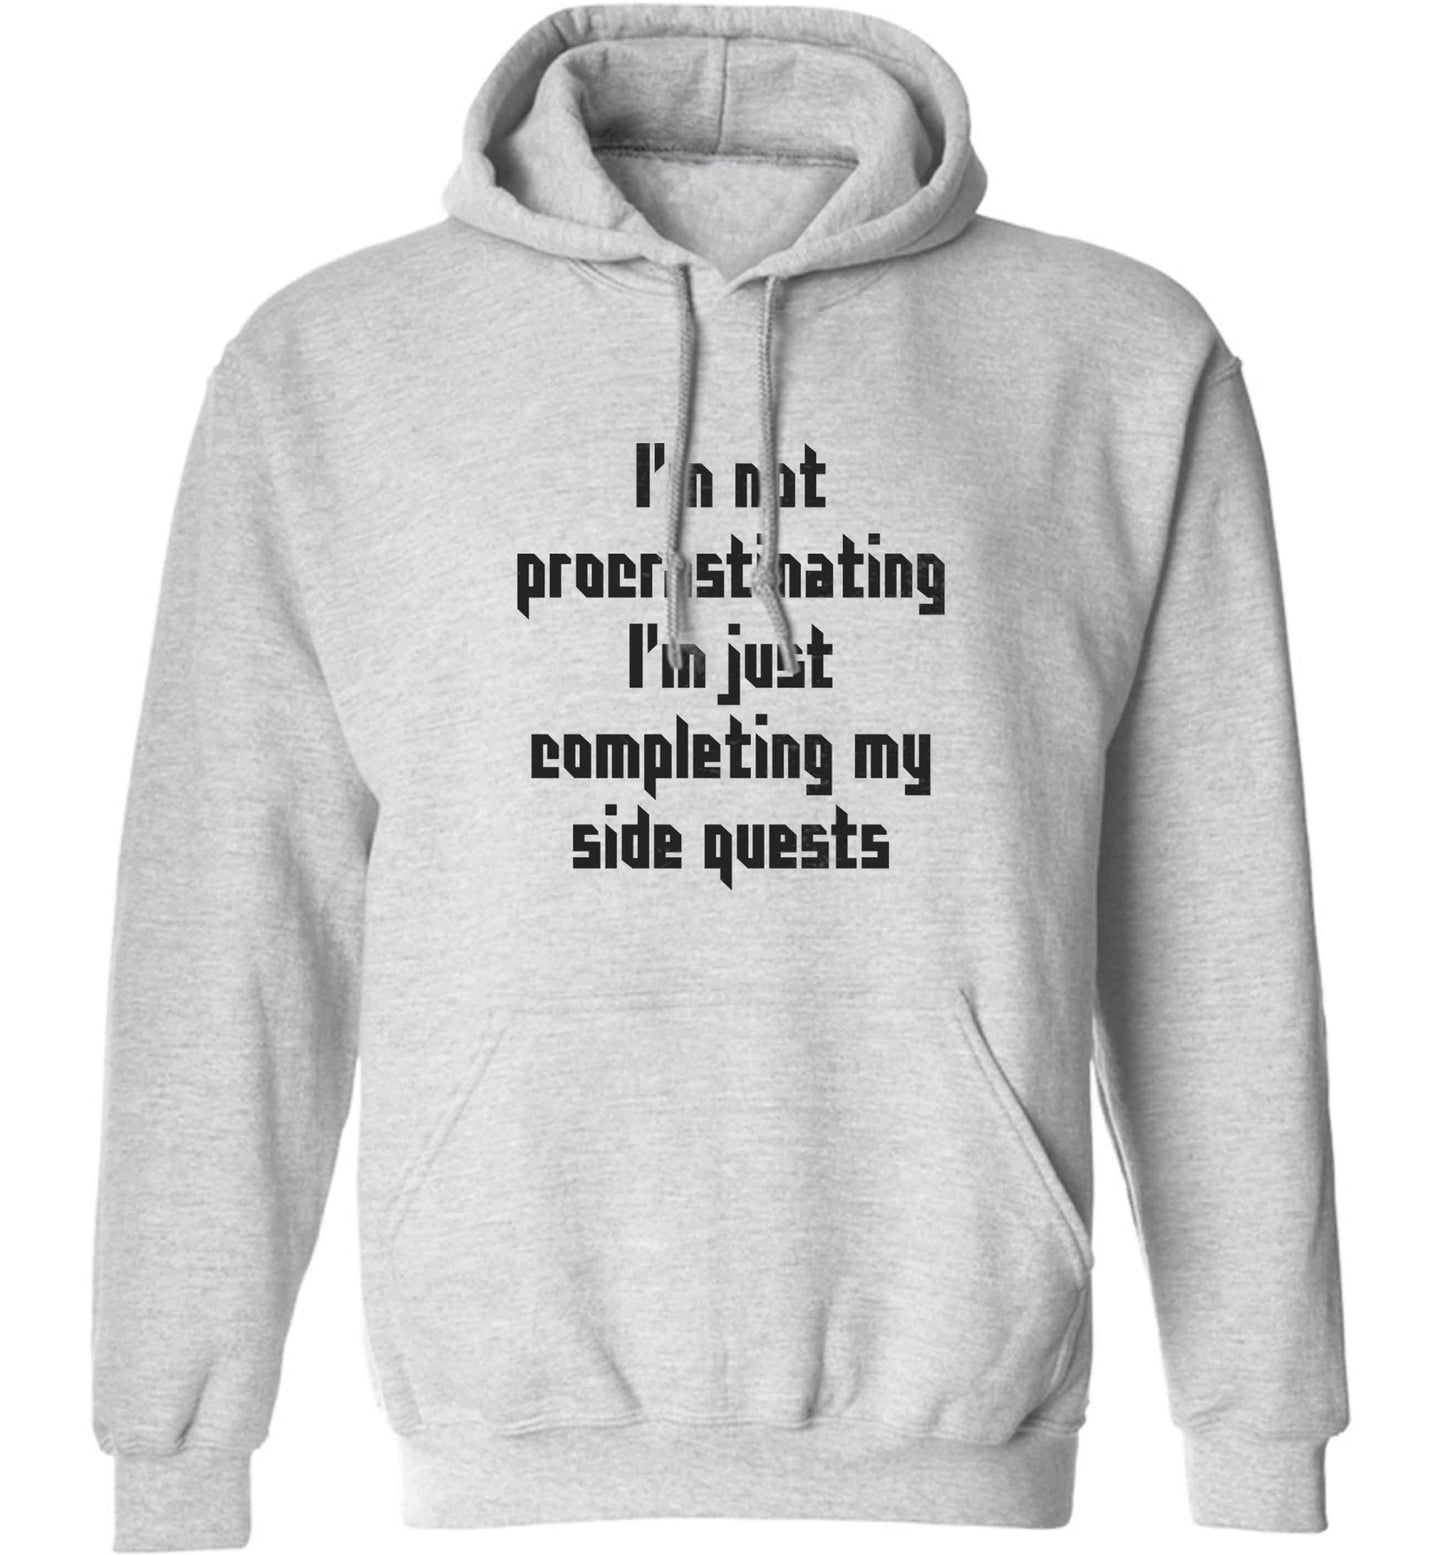 I'm not procrastinating I'm just completing my side quests adults unisex grey hoodie 2XL